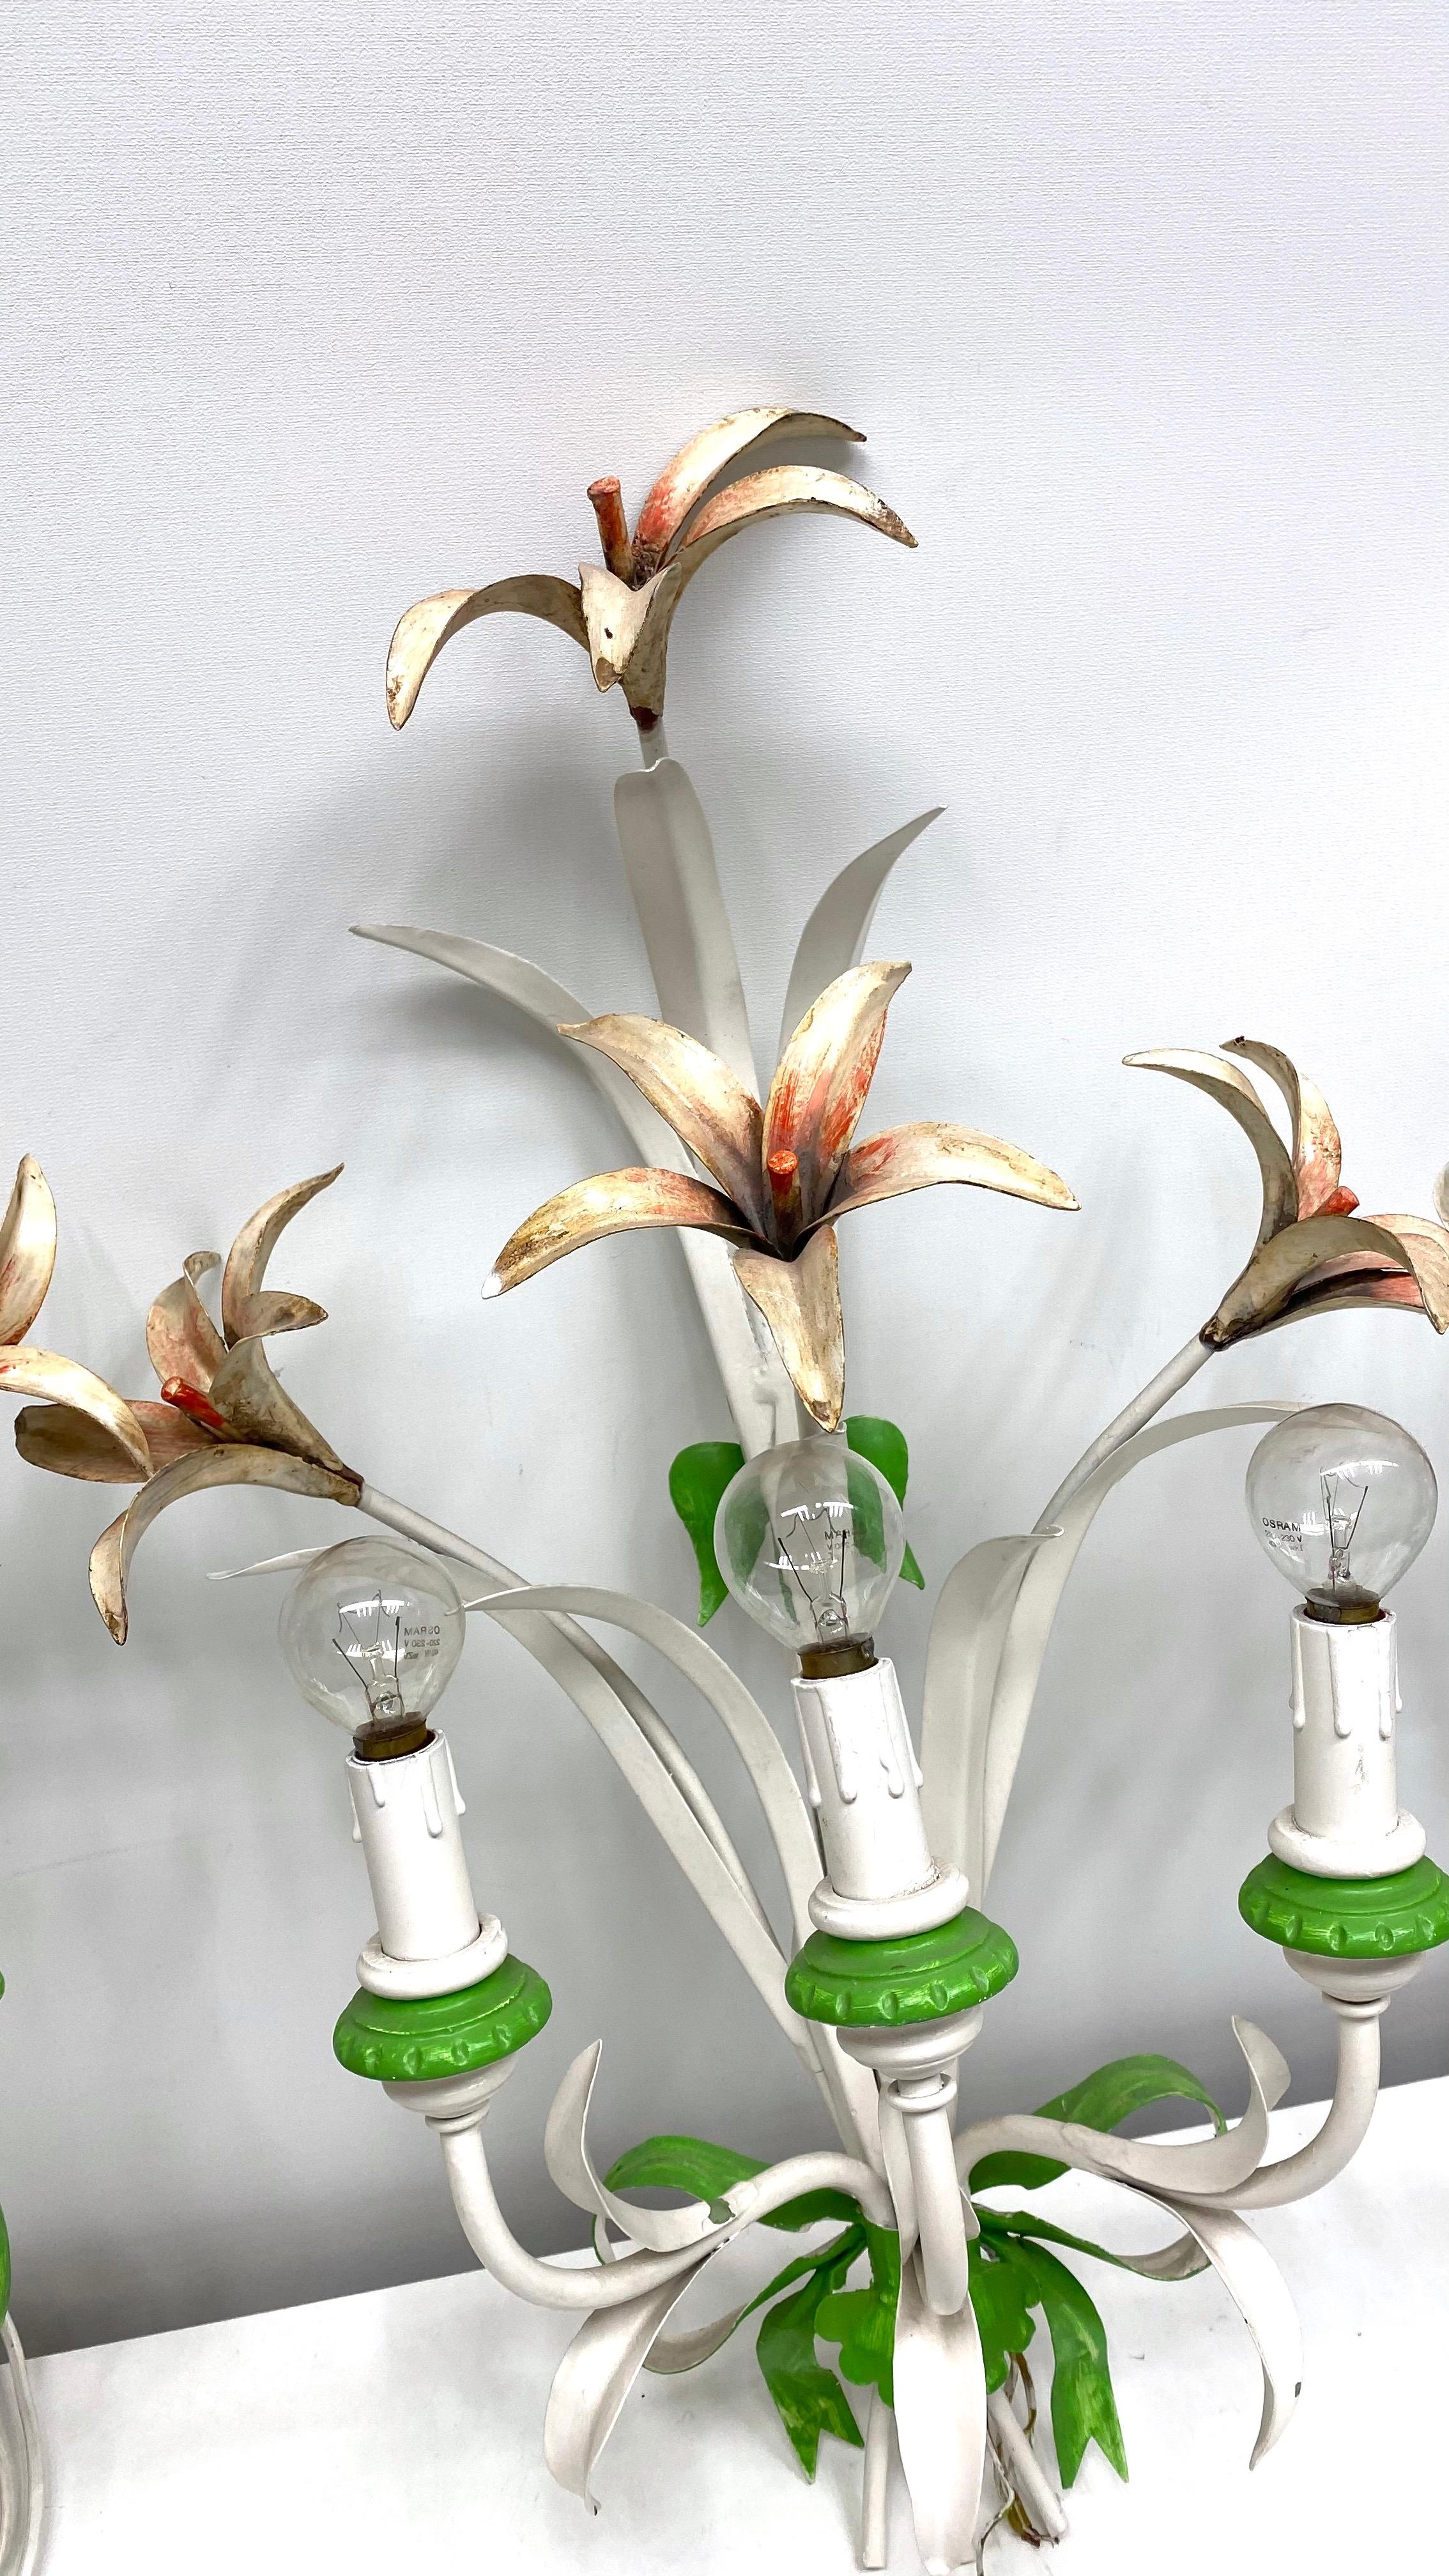 Set of Three Shabby Chic Flower Leaf Tole Sconces Polychrome Metal, 1960s, Italy For Sale 2